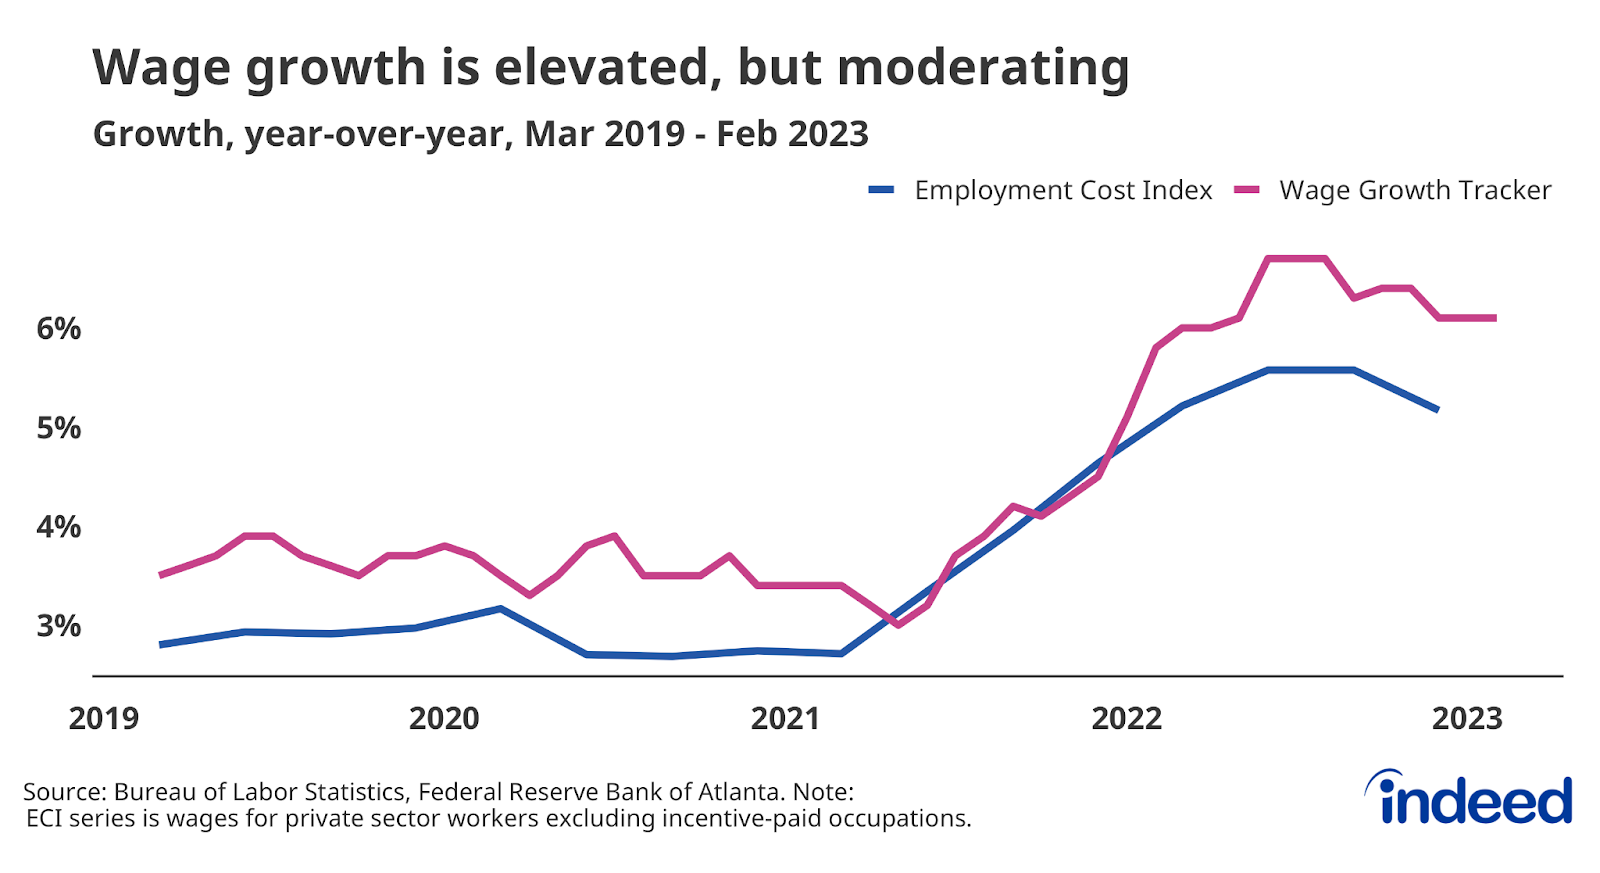 Line graph titled “Wage growth is elevated, but moderating” with a vertical axis from 3% to 6%.